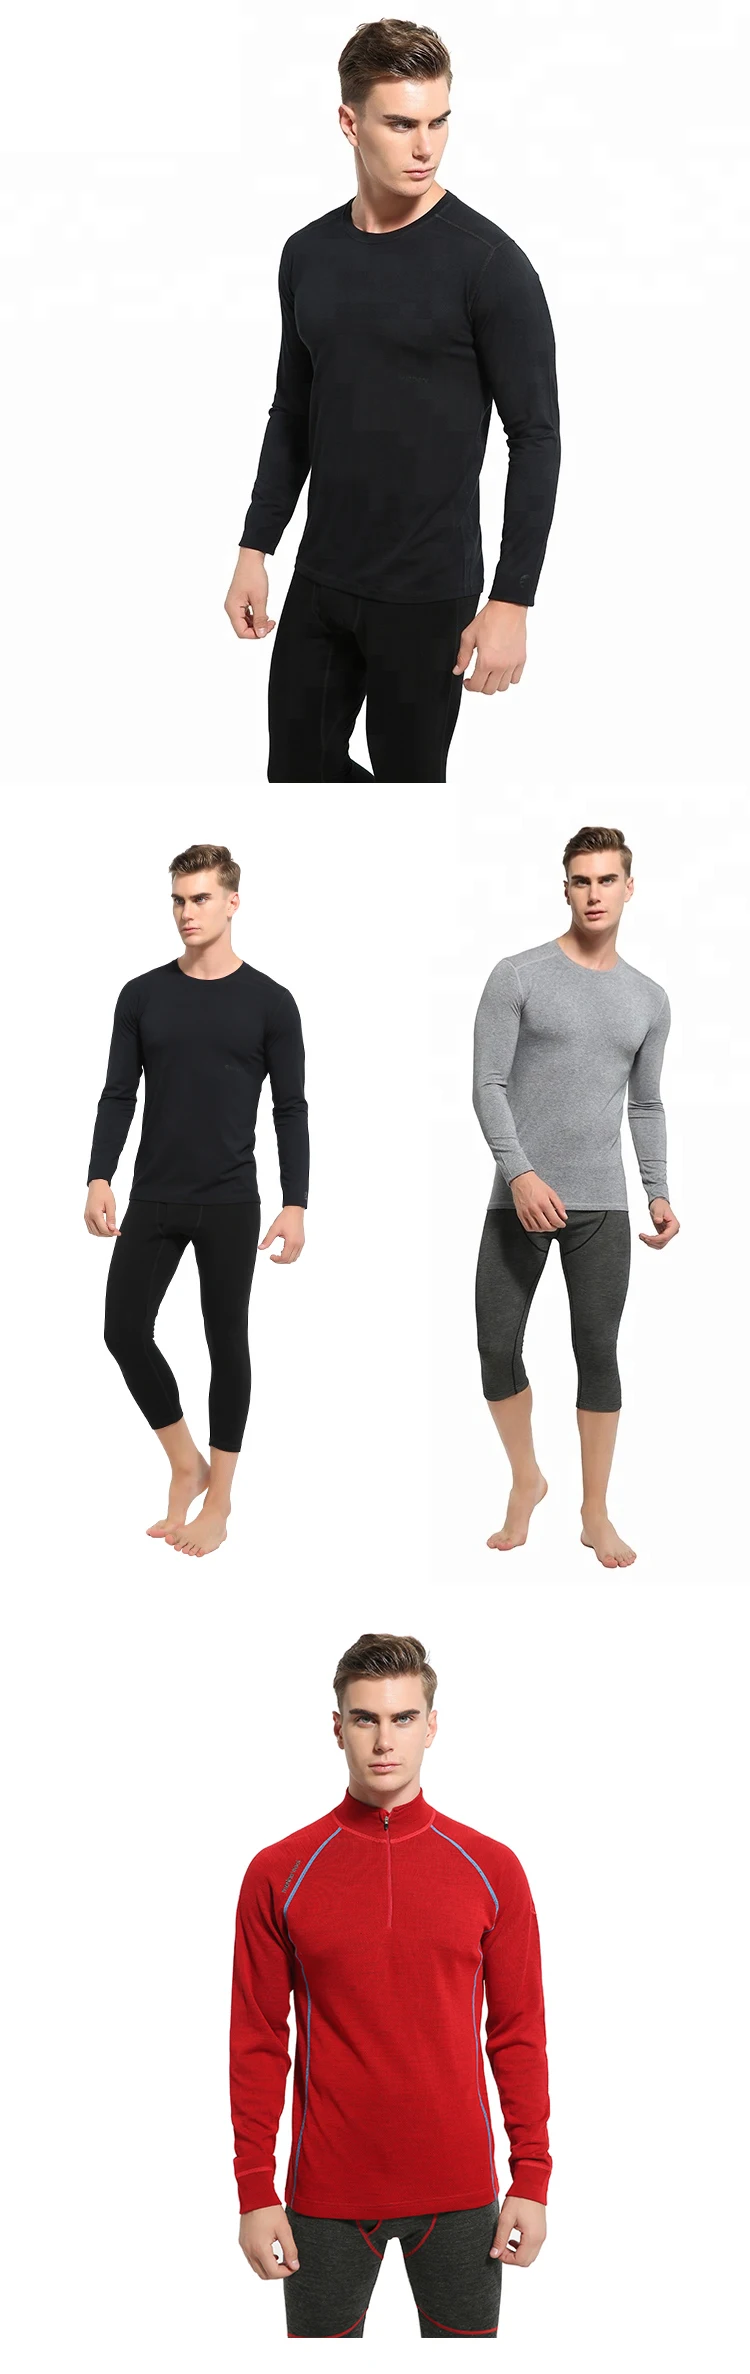 Hiking skiing tops thermal compression